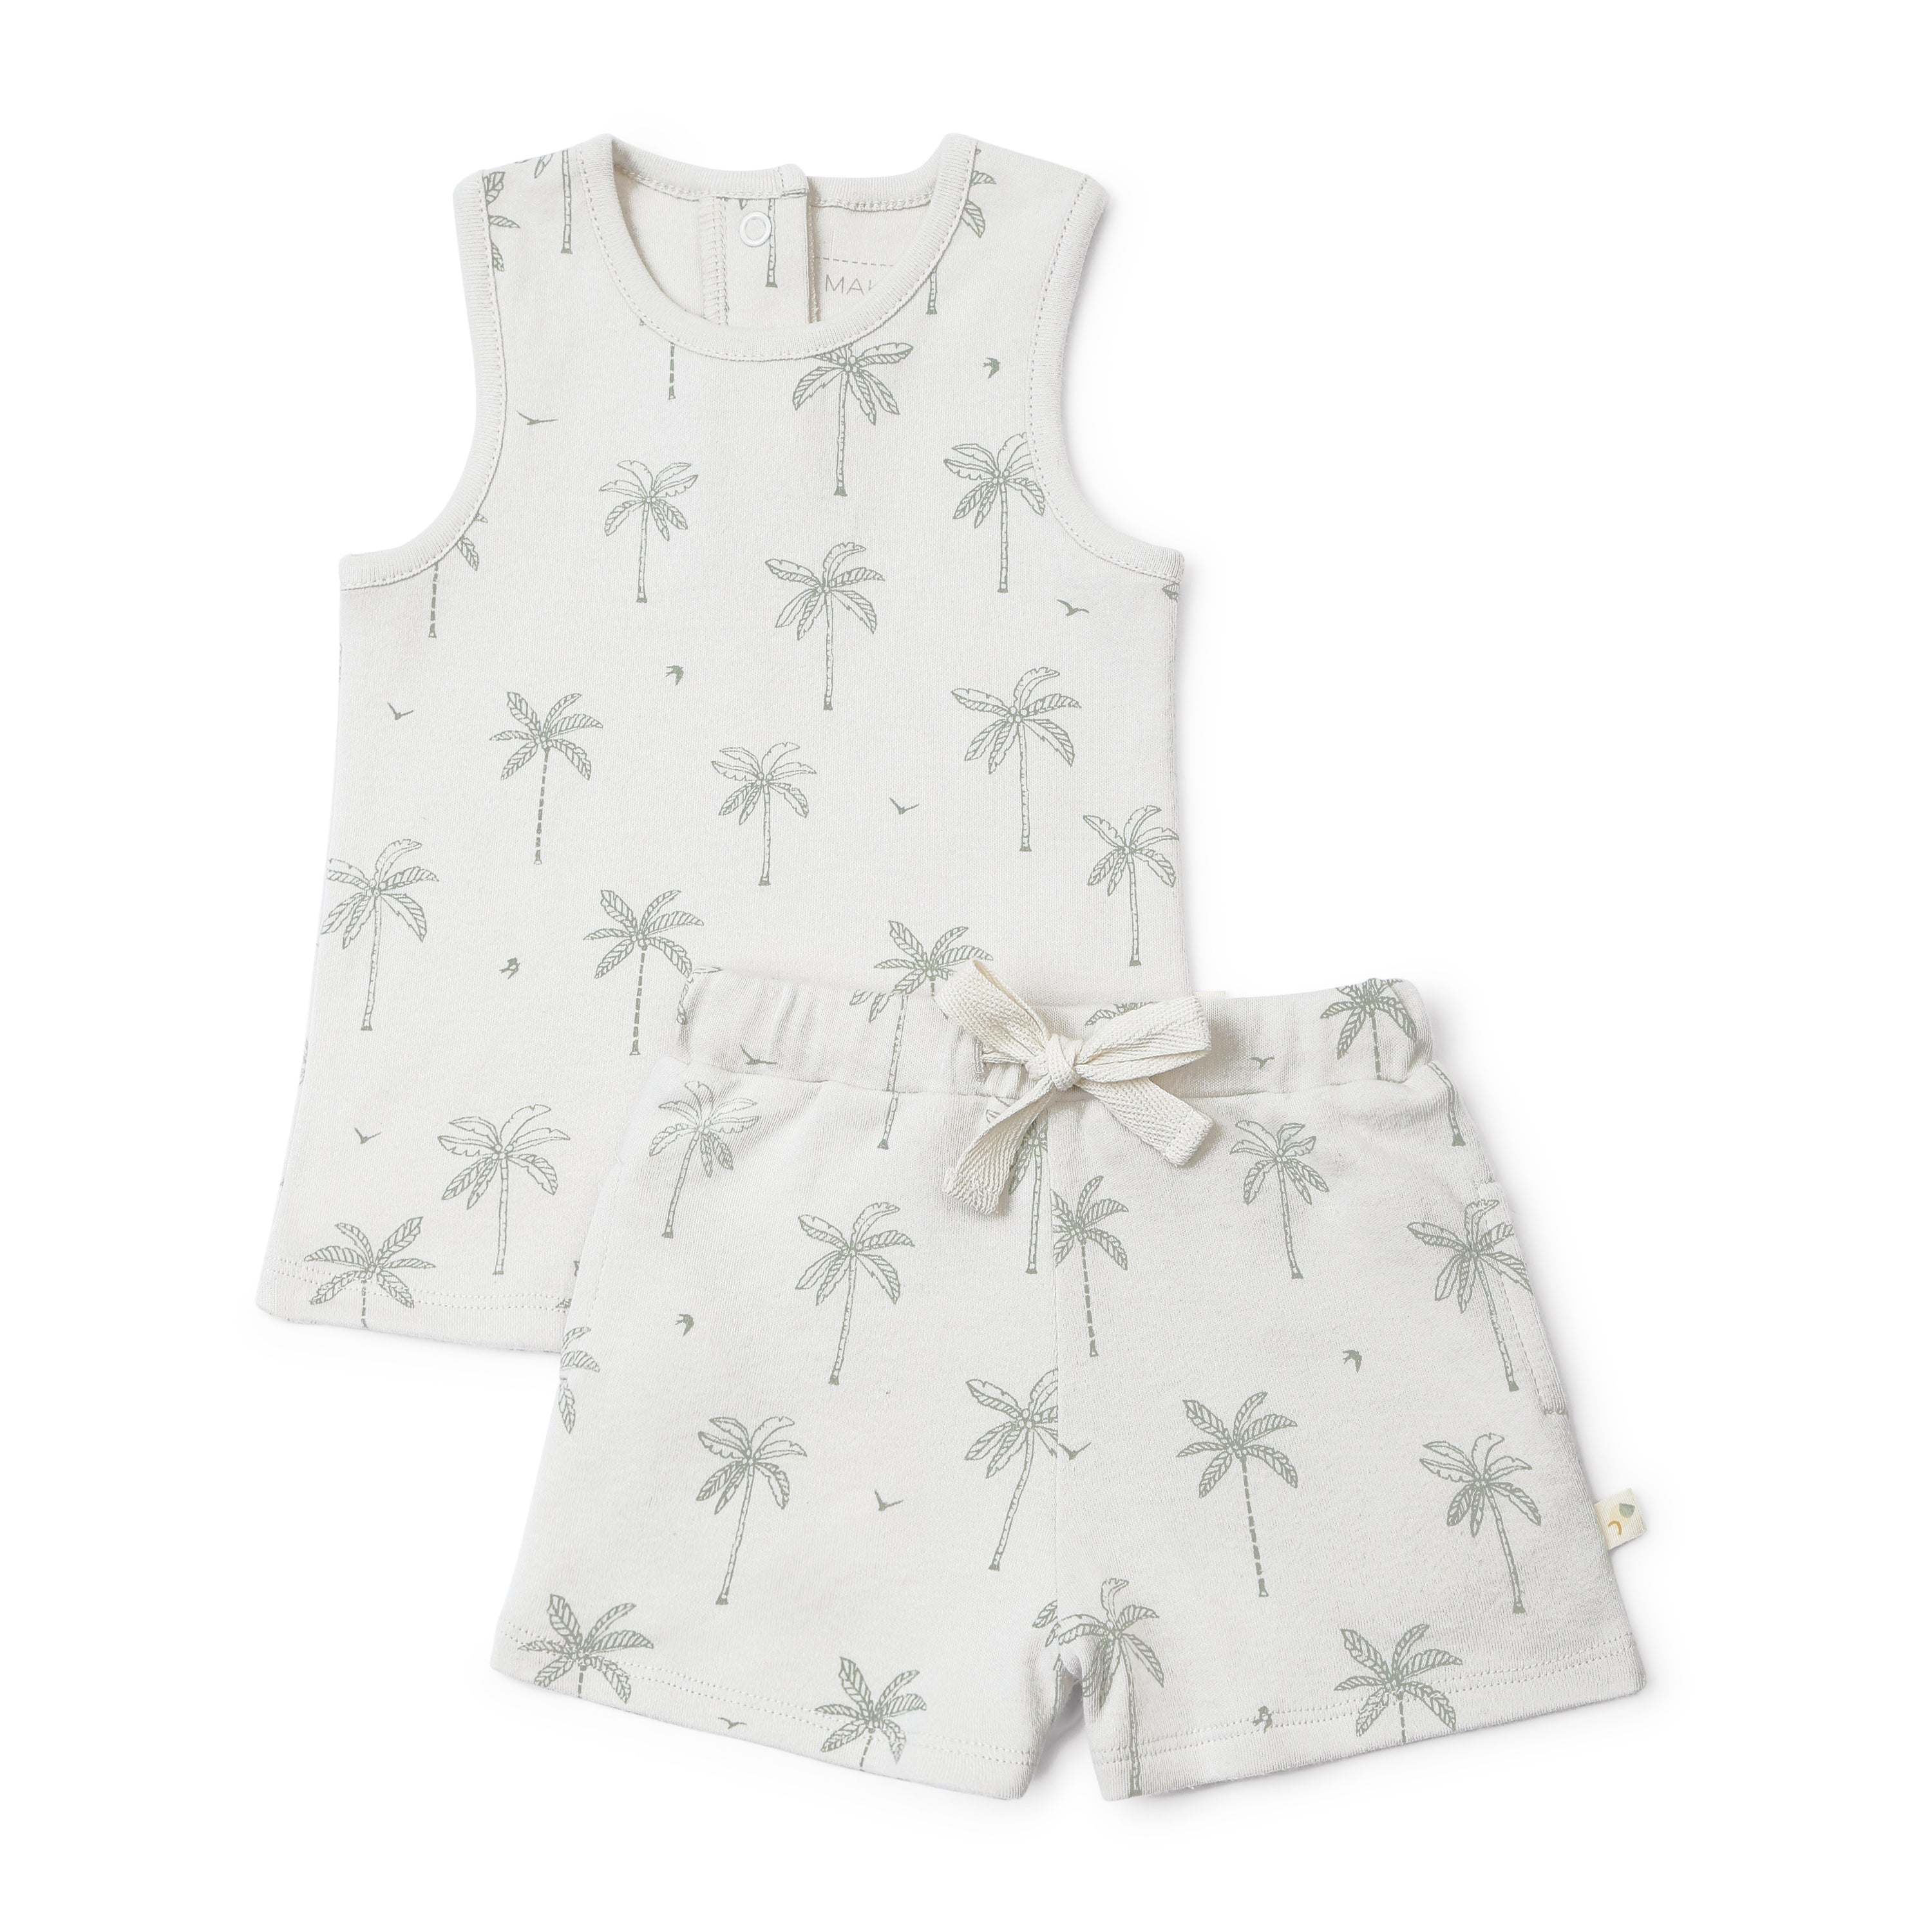 Organic Kids' Organic Tee & Shorts - Tropical, with a sleeveless top and shorts featuring a matching beige palm tree print on a white background. The shorts have a drawstring waist.